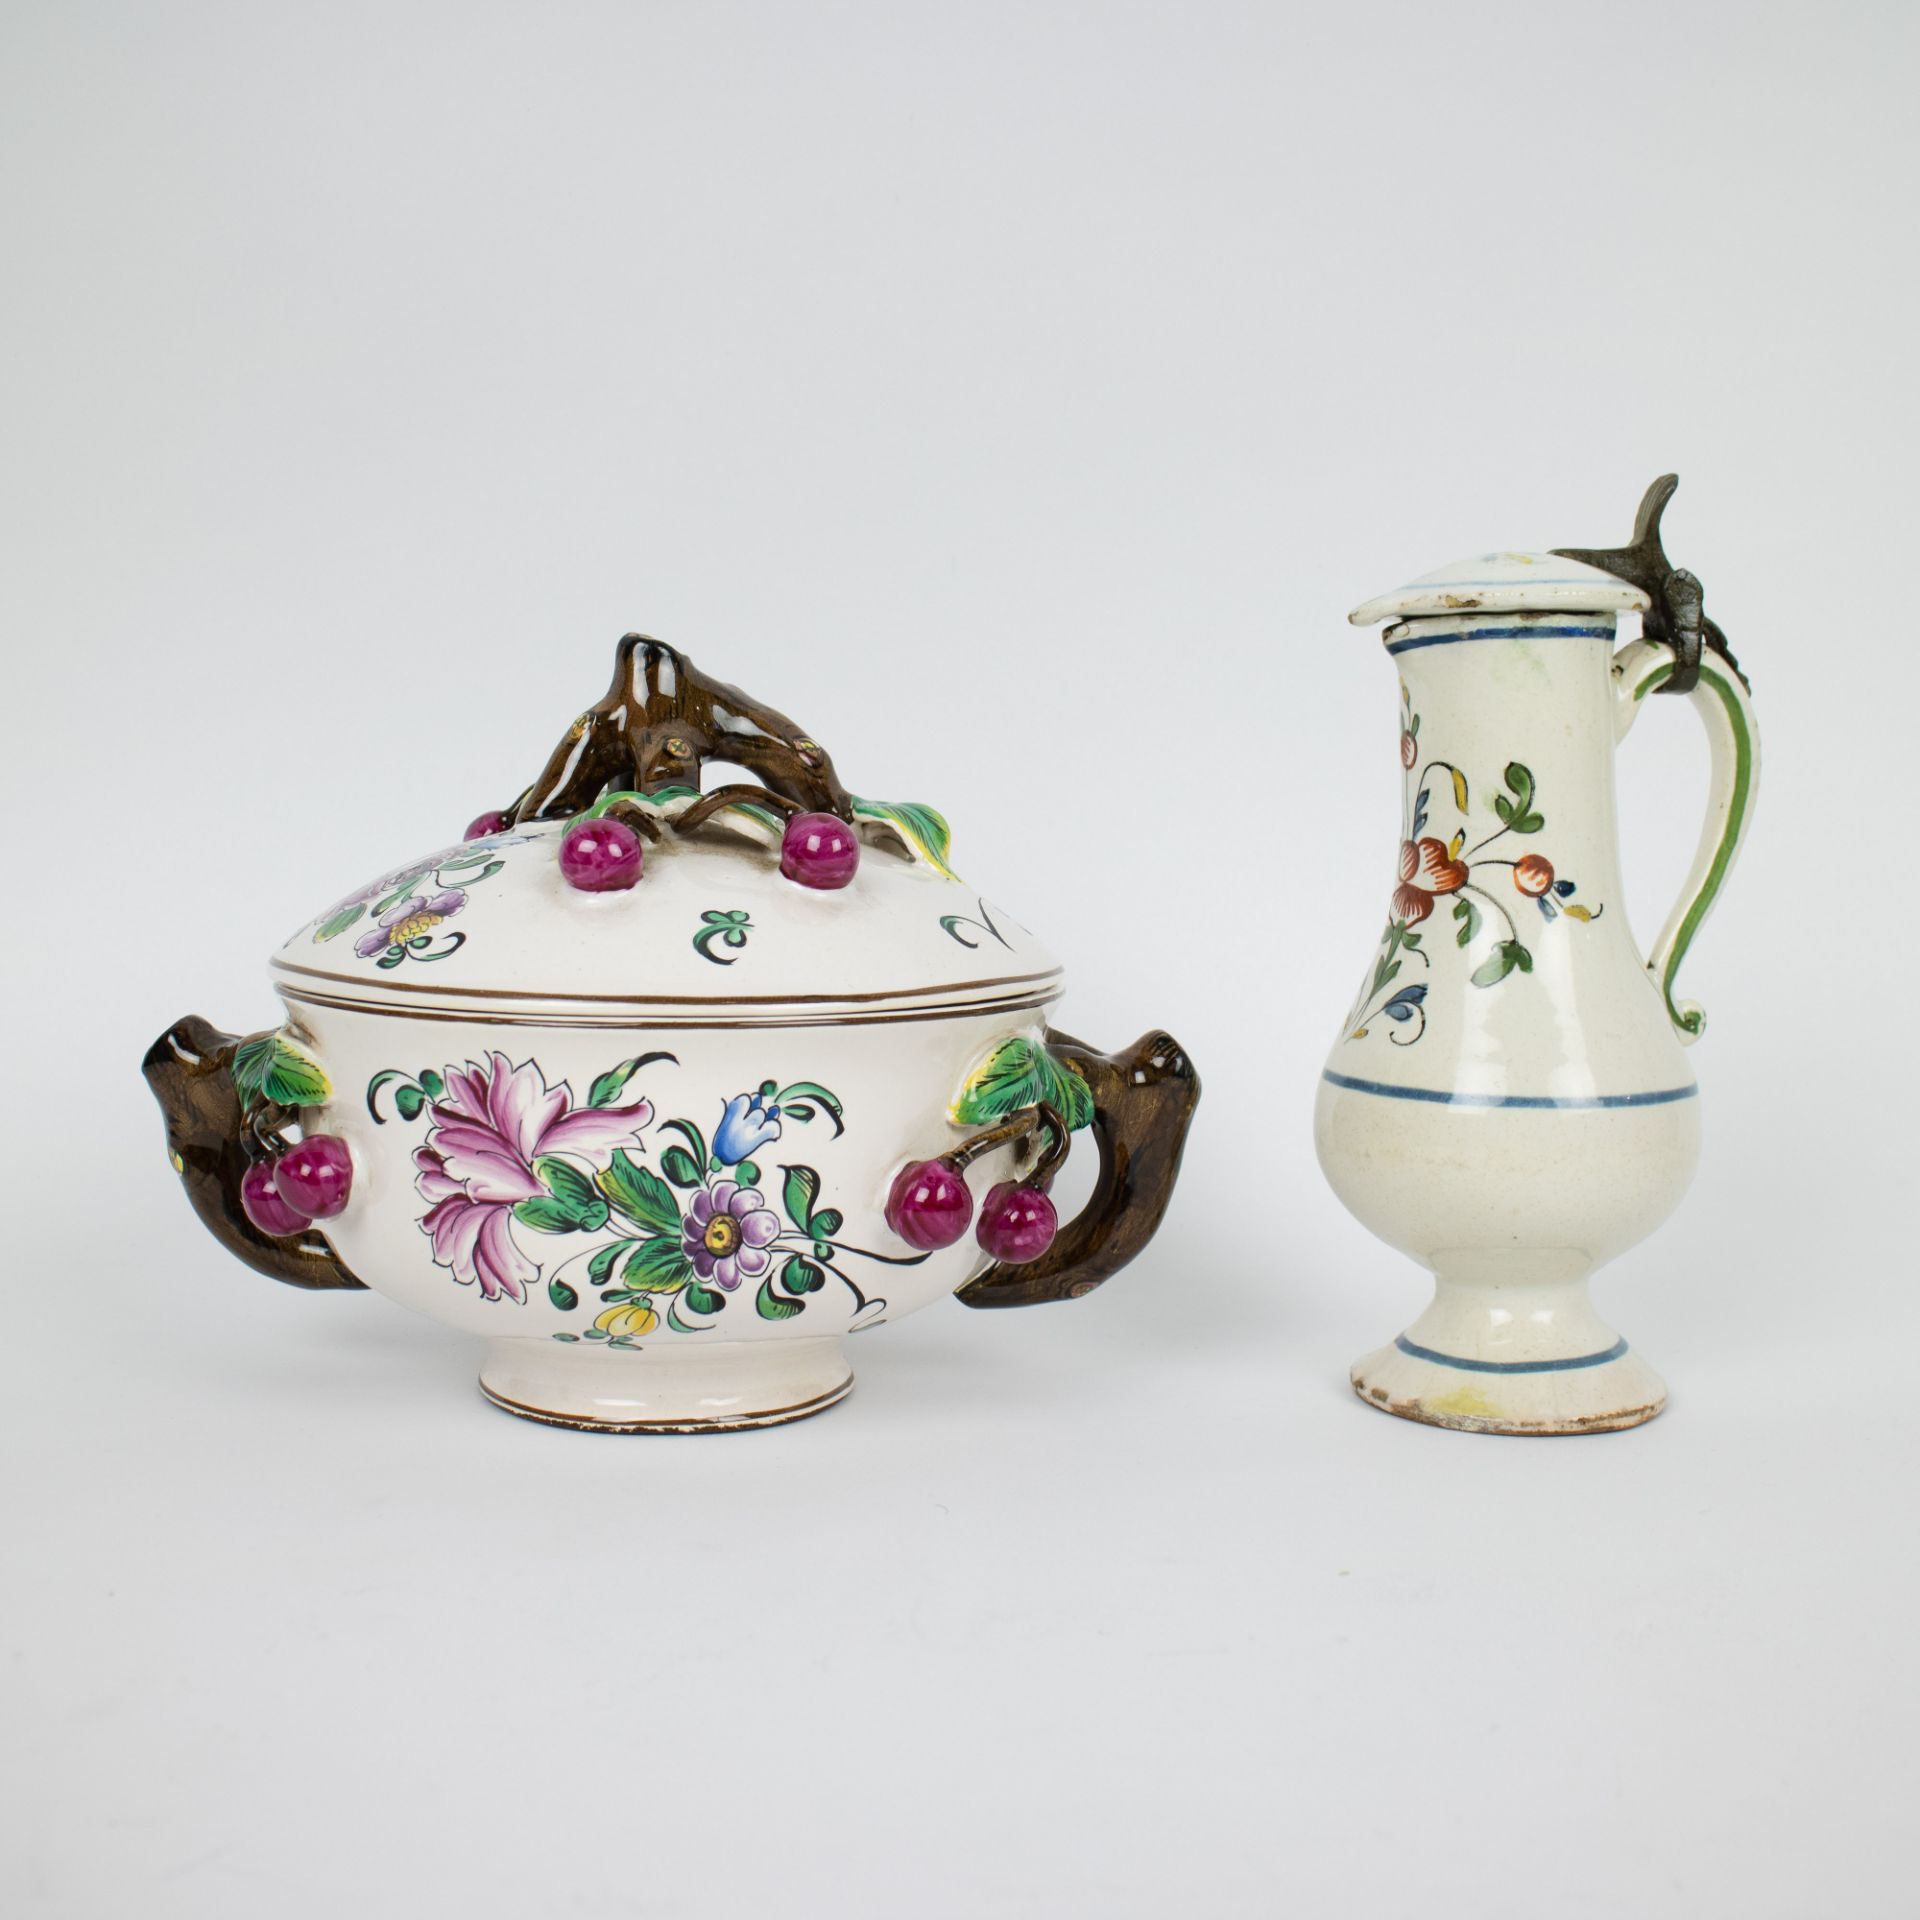 Faience Rouen, revolution plate, jug 18th - 19th century - Image 8 of 12